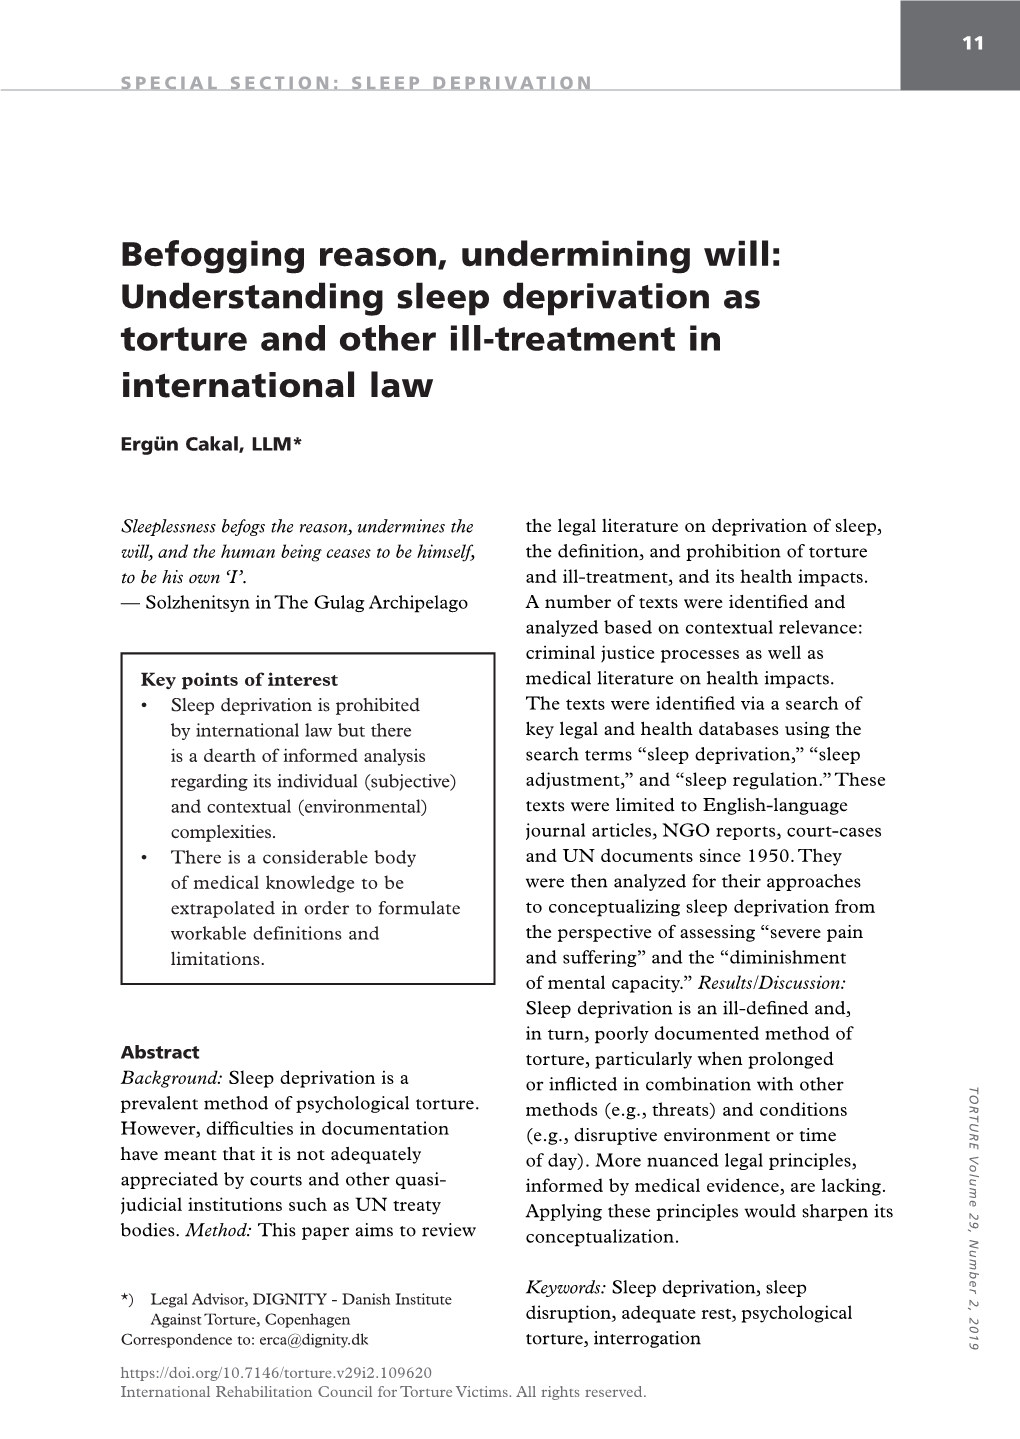 Understanding Sleep Deprivation As Torture and Other Ill-Treatment in International Law